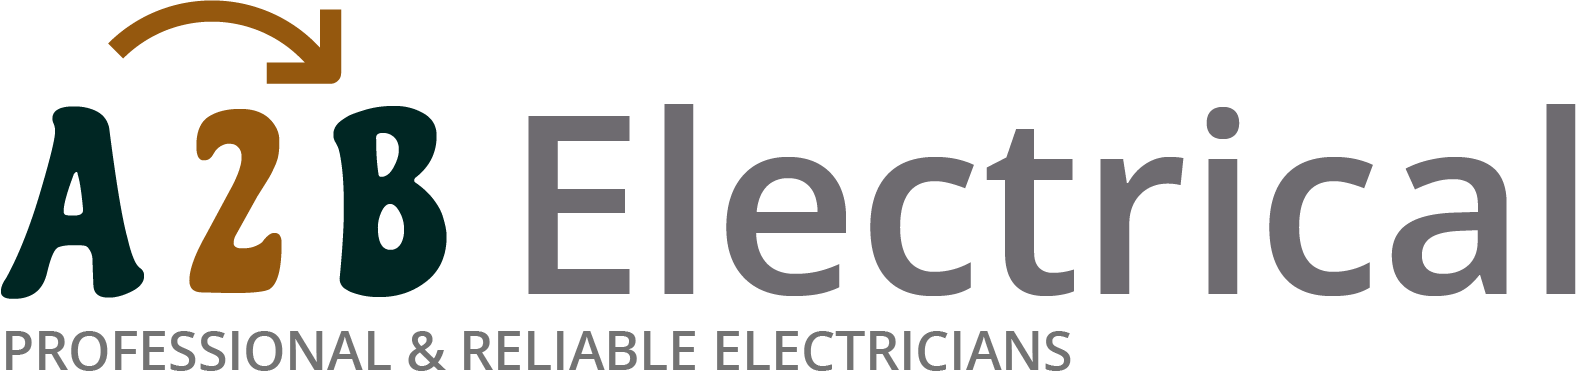 If you have electrical wiring problems in Quedgeley, we can provide an electrician to have a look for you. 